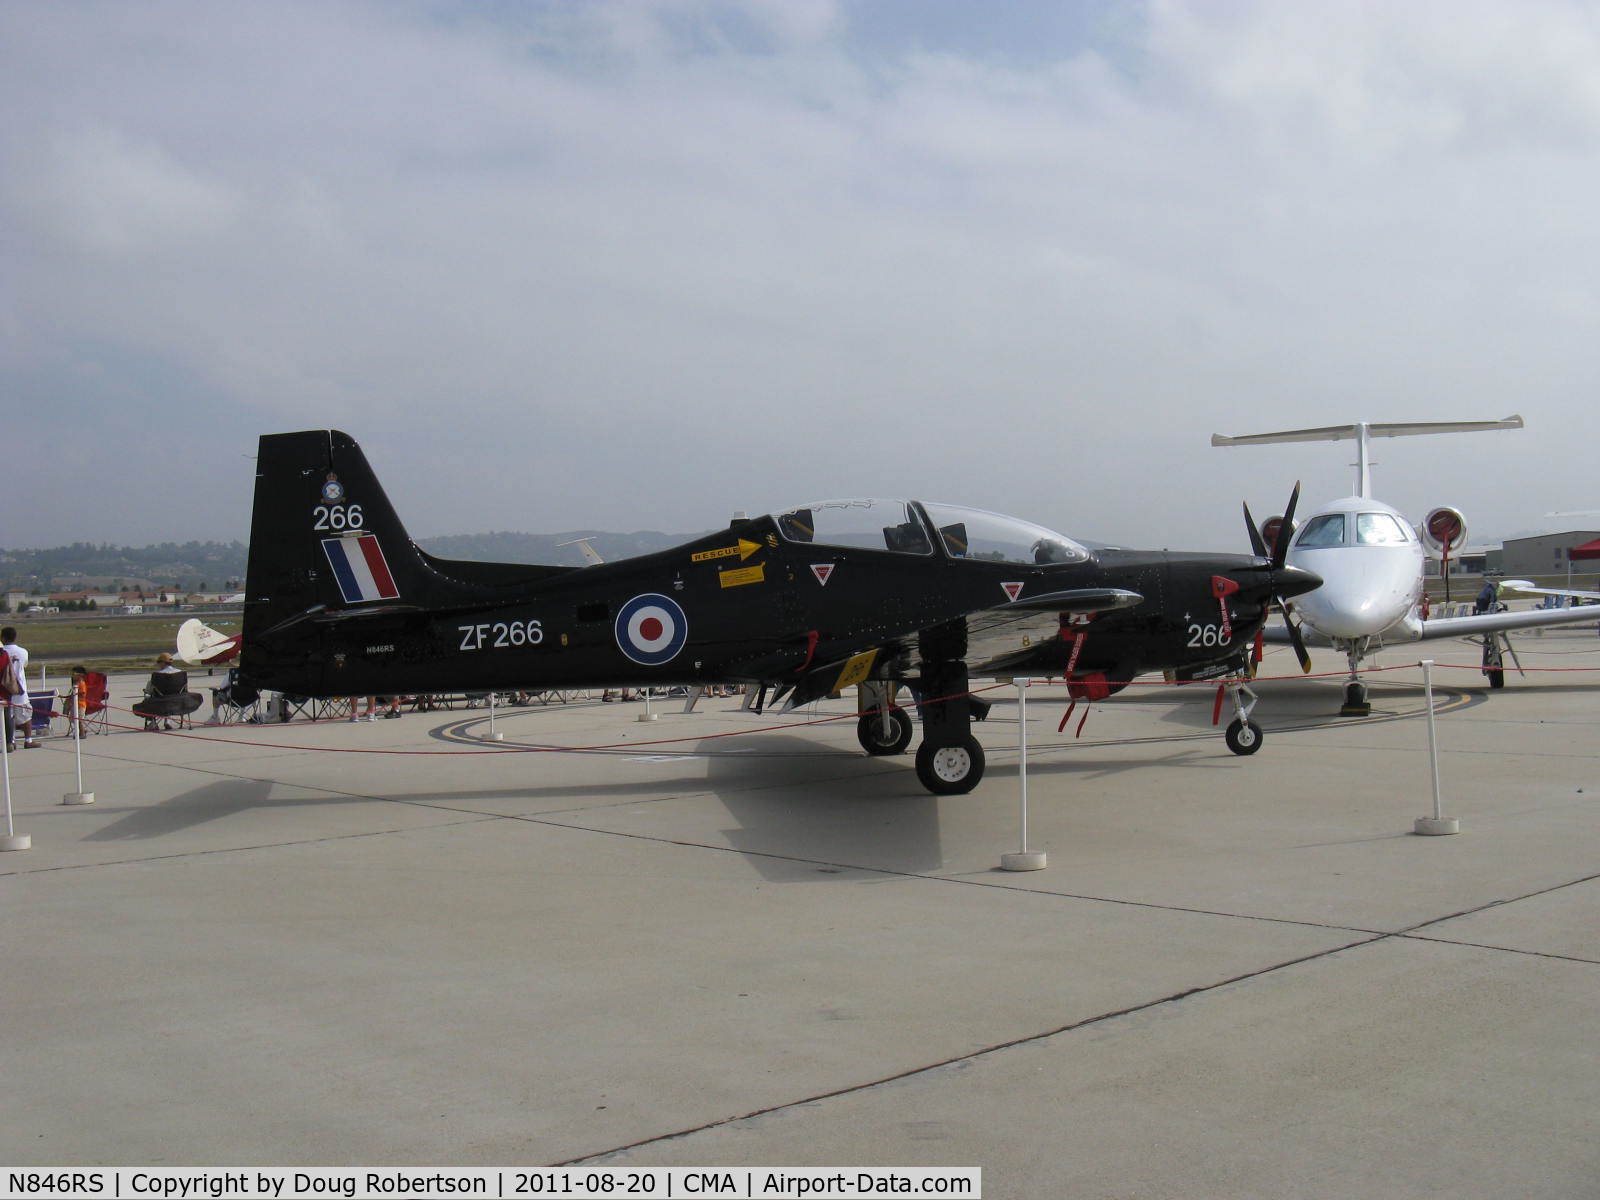 N846RS, 1990 Short S-312 Tucano T1 C/N S056/T50, Short Bros. PLC S312 TUCANO T1 Mk.1, one Garrett TPE331-12B Turboprop 1,100 shp in RAF livery, Martin-Baker MB 8LC Ejection Seats